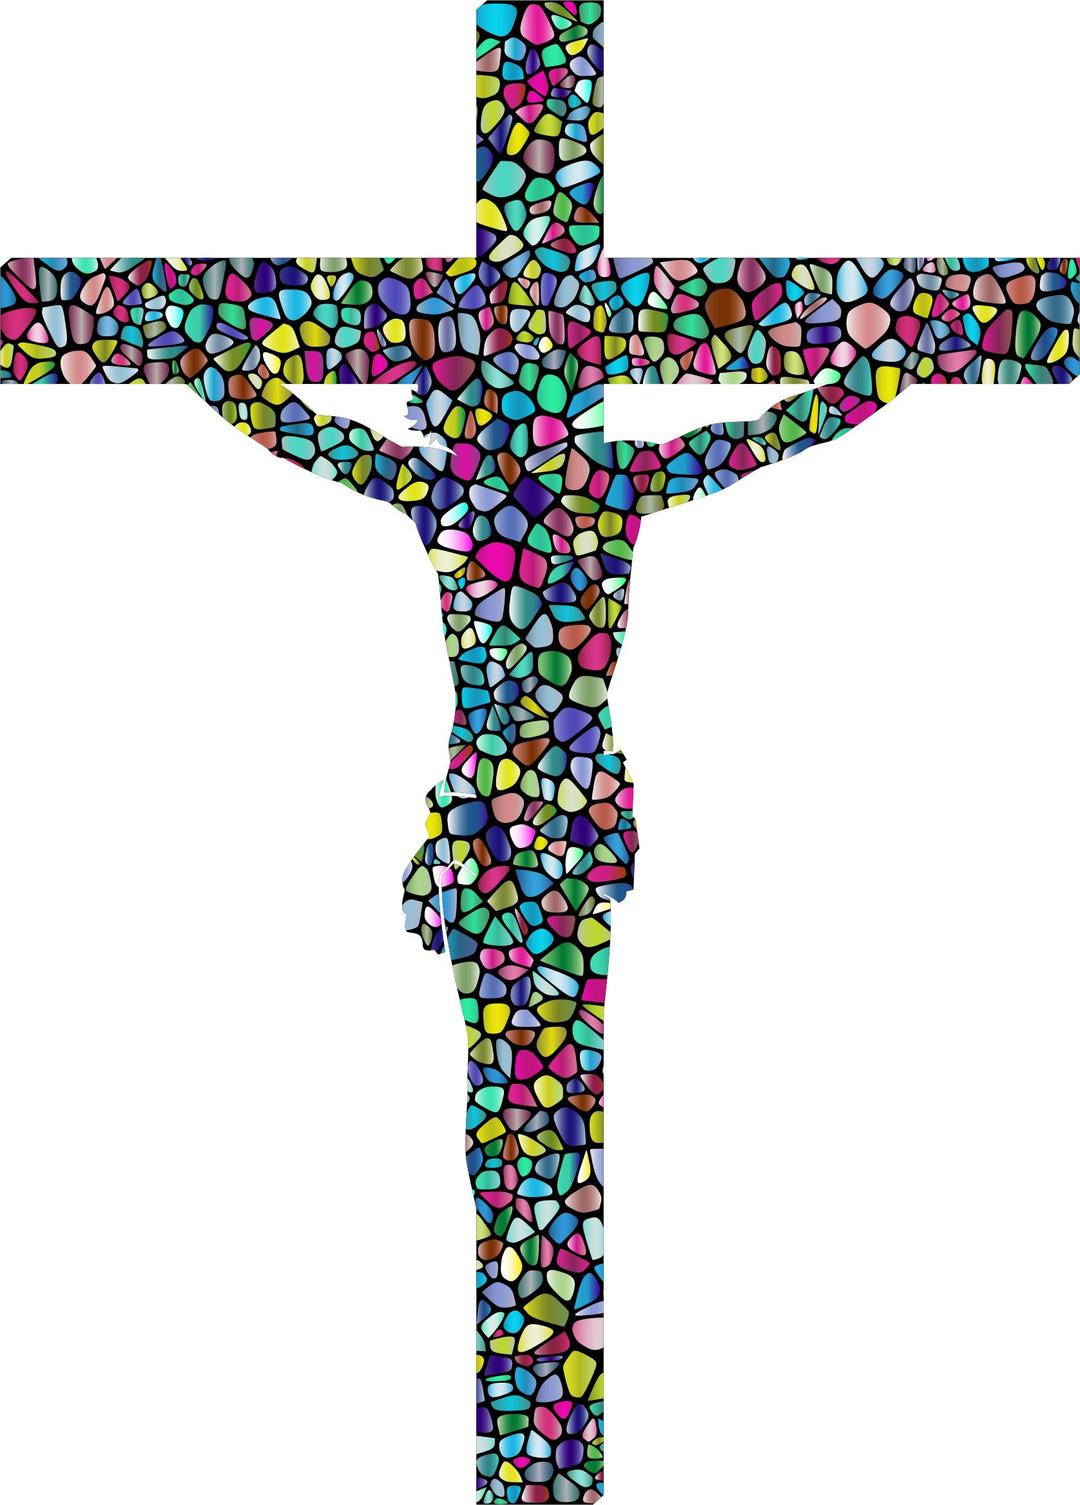 Polyprismatic Tiled Crucifix With Background png transparent